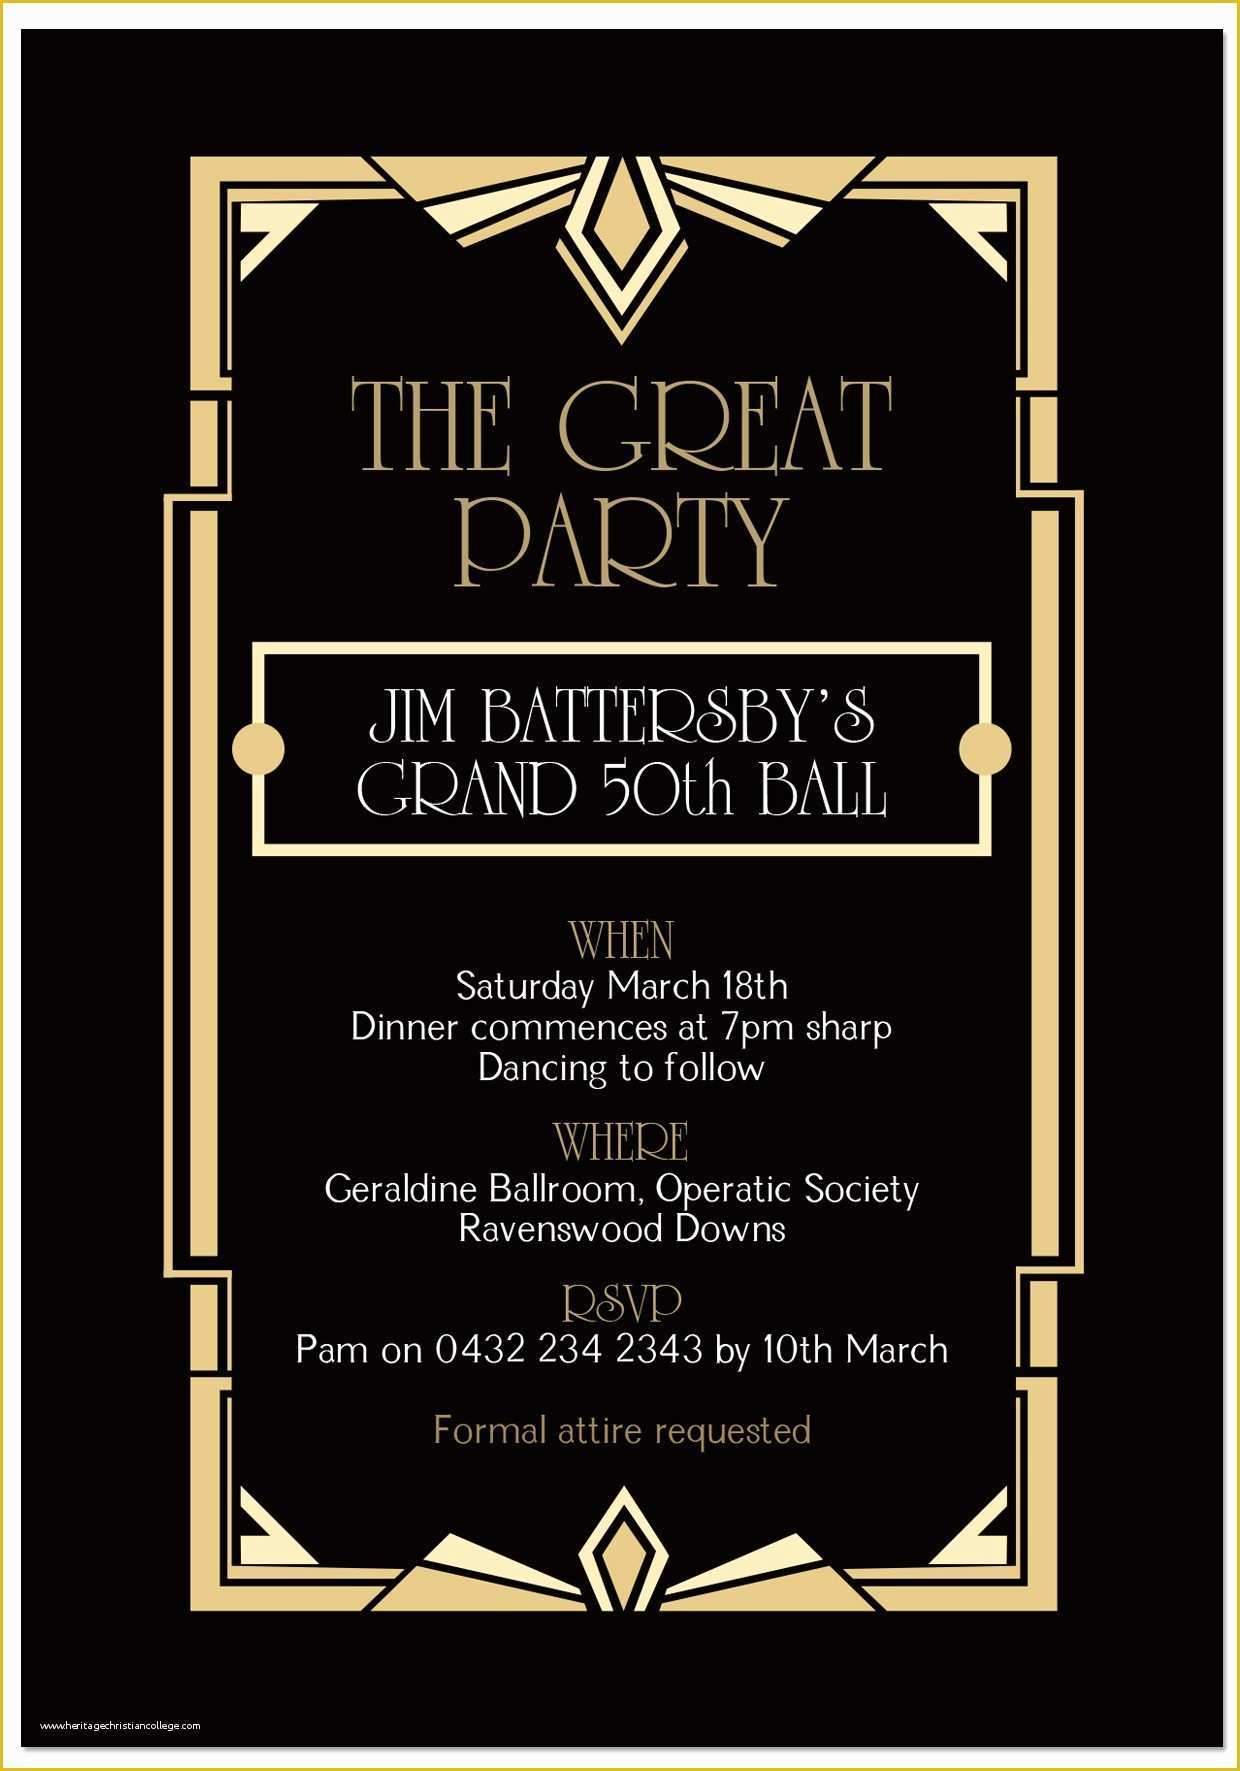 1920s Party Invitation Template Free Of Great Gatsby Party Invitation Template